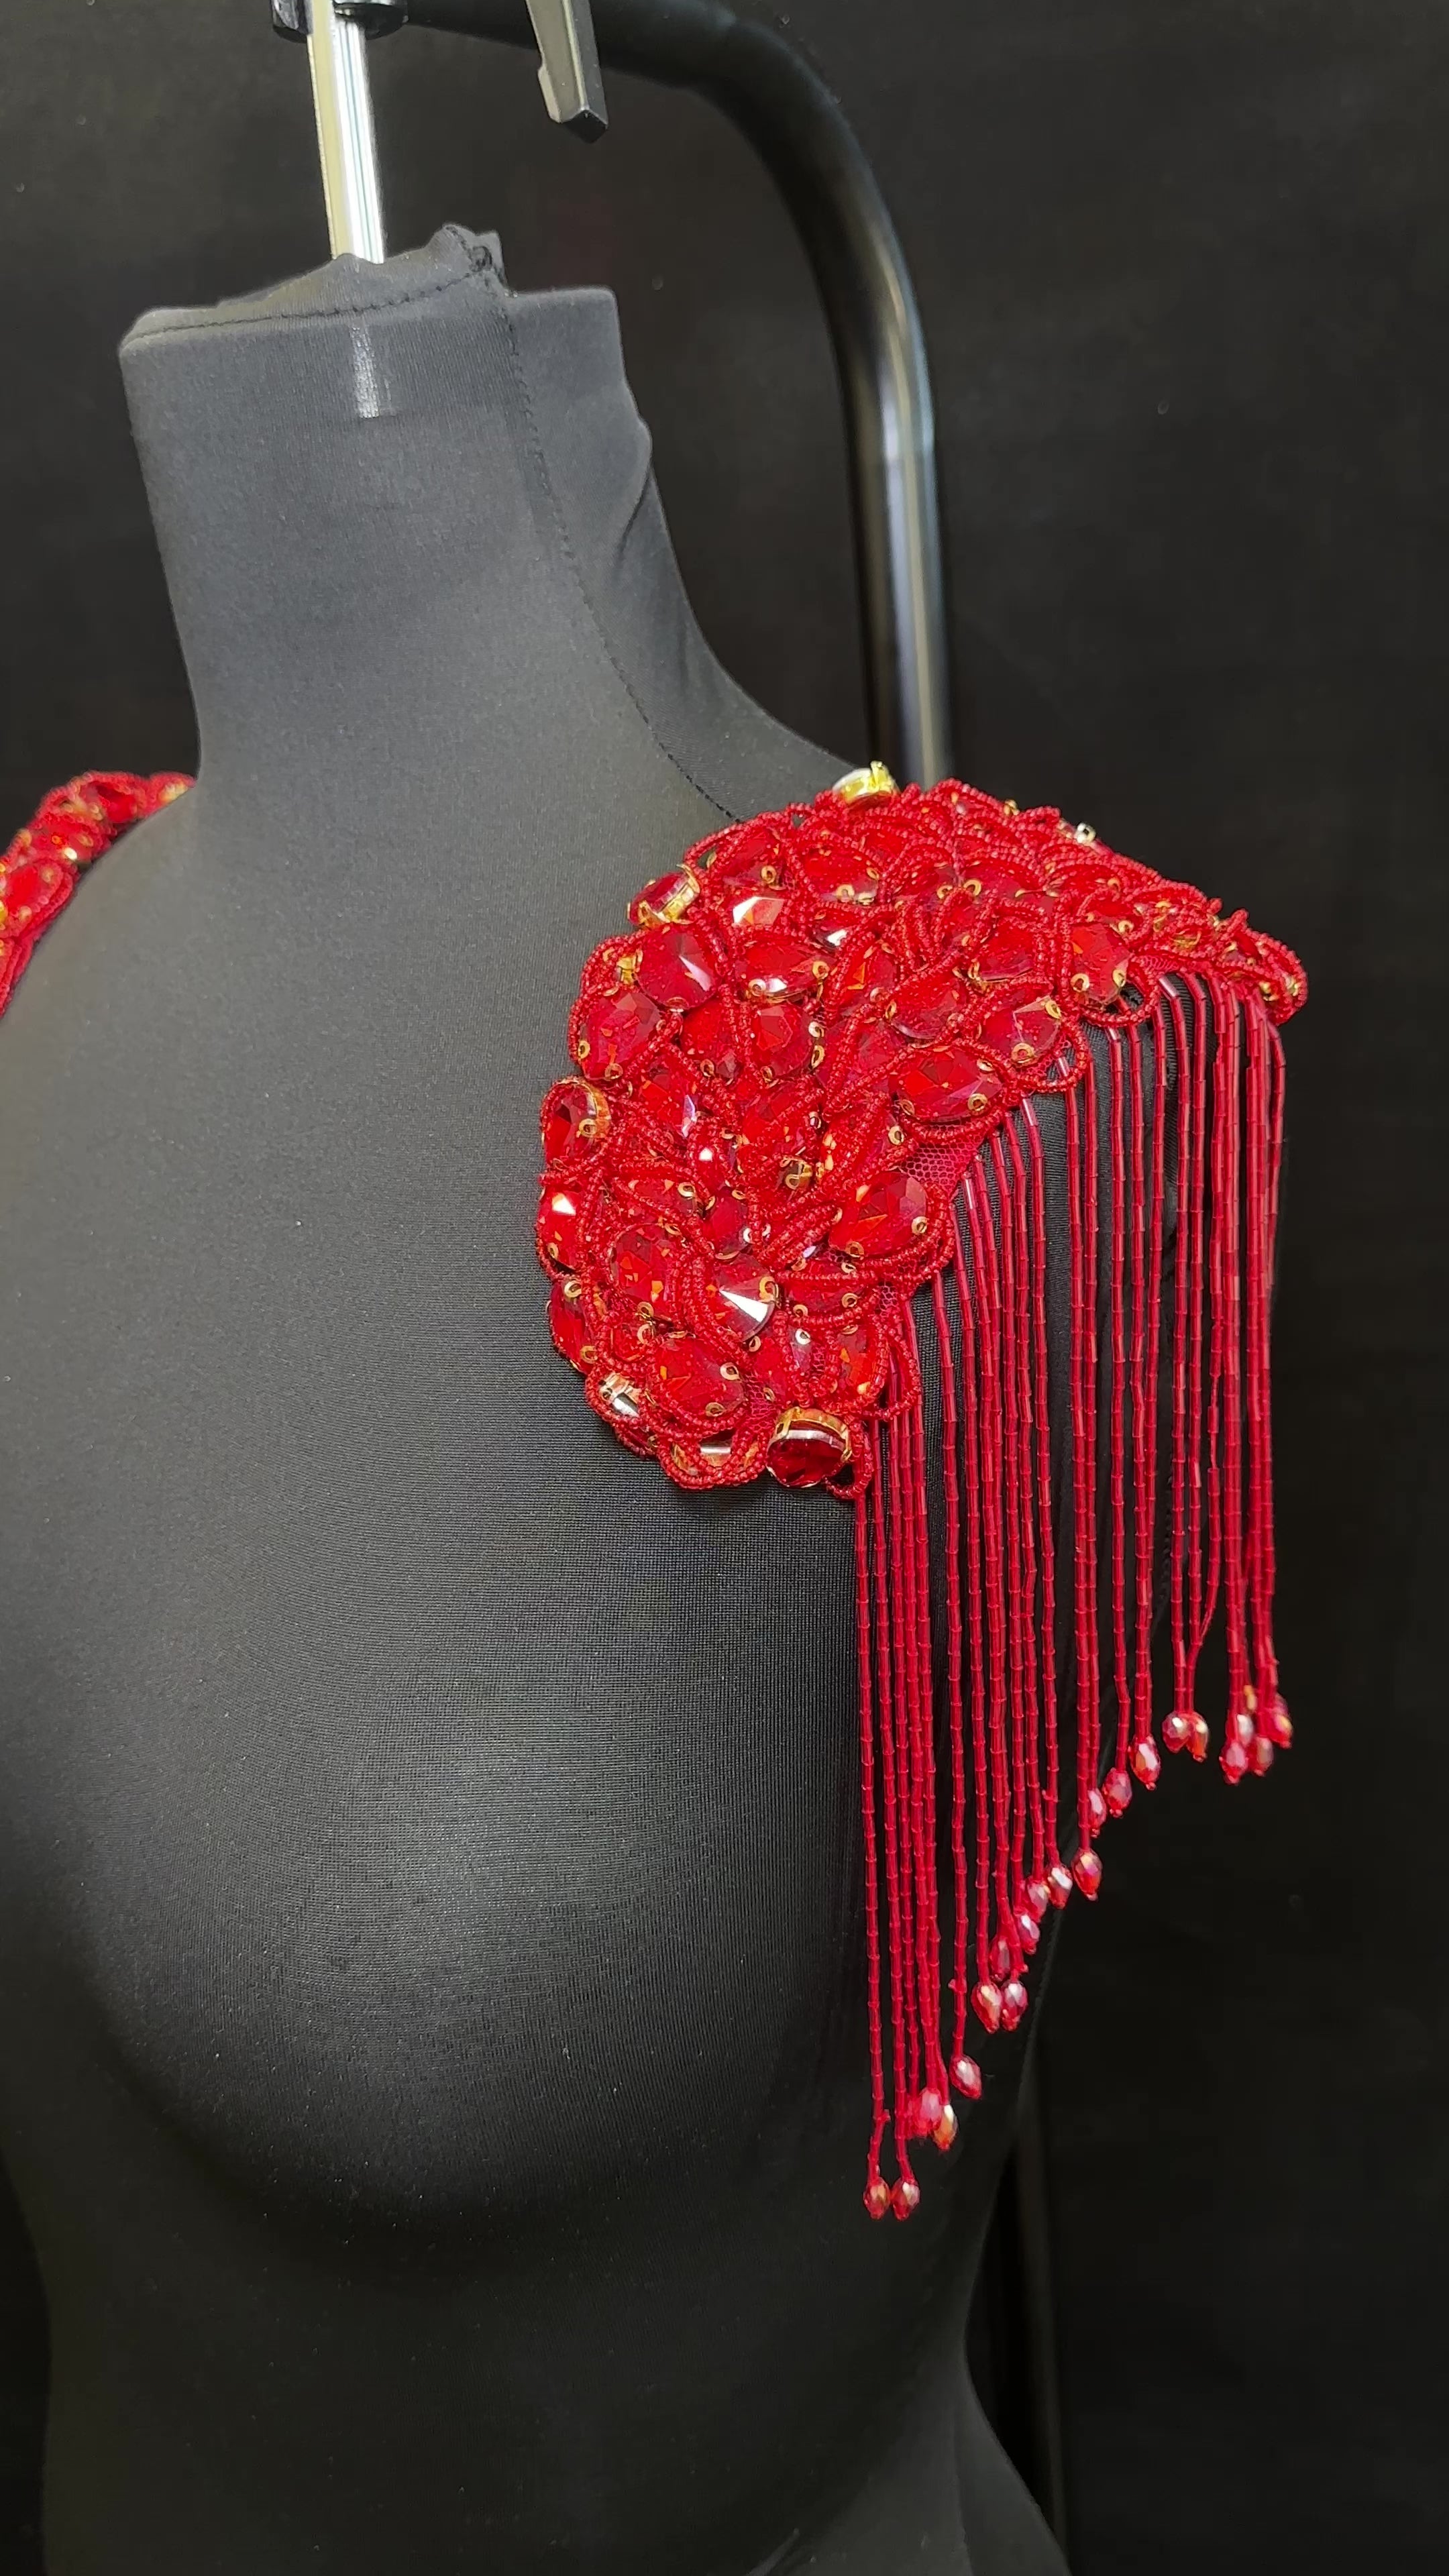 Cali Red Shoulders Rhinestone Applique , red applique, dark red applique, red bodice, red embellishment for dress,